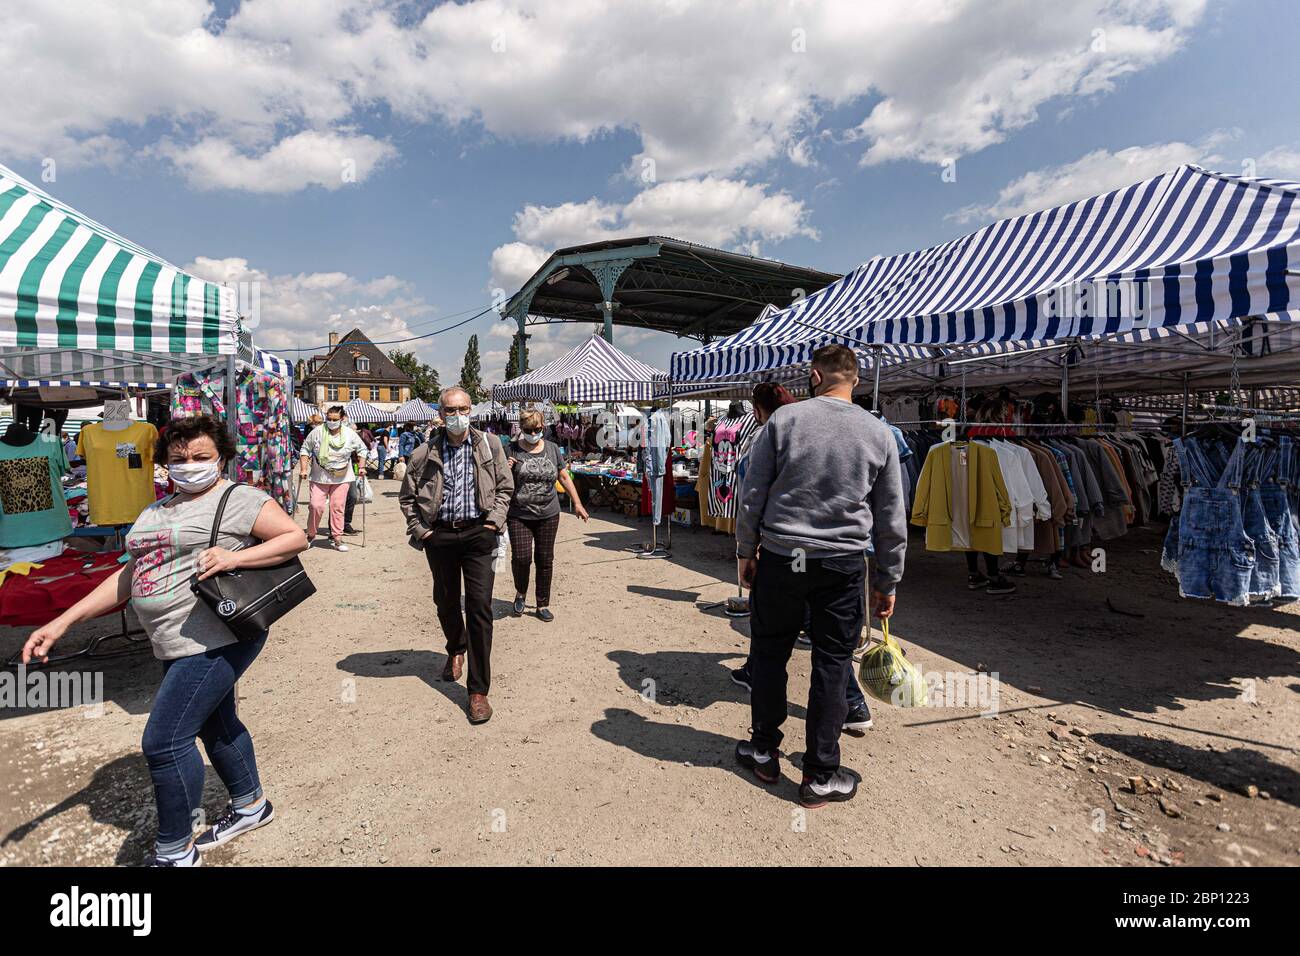 Wroclaw, Poland. 17th May, 2020. 17 May 2020 Wroclaw Poland. For the first time since the epidemic was announced in Poland, the marketplace was authorized to exercise caution Credit: Krzysztof Kaniewski/ZUMA Wire/Alamy Live News Stock Photo